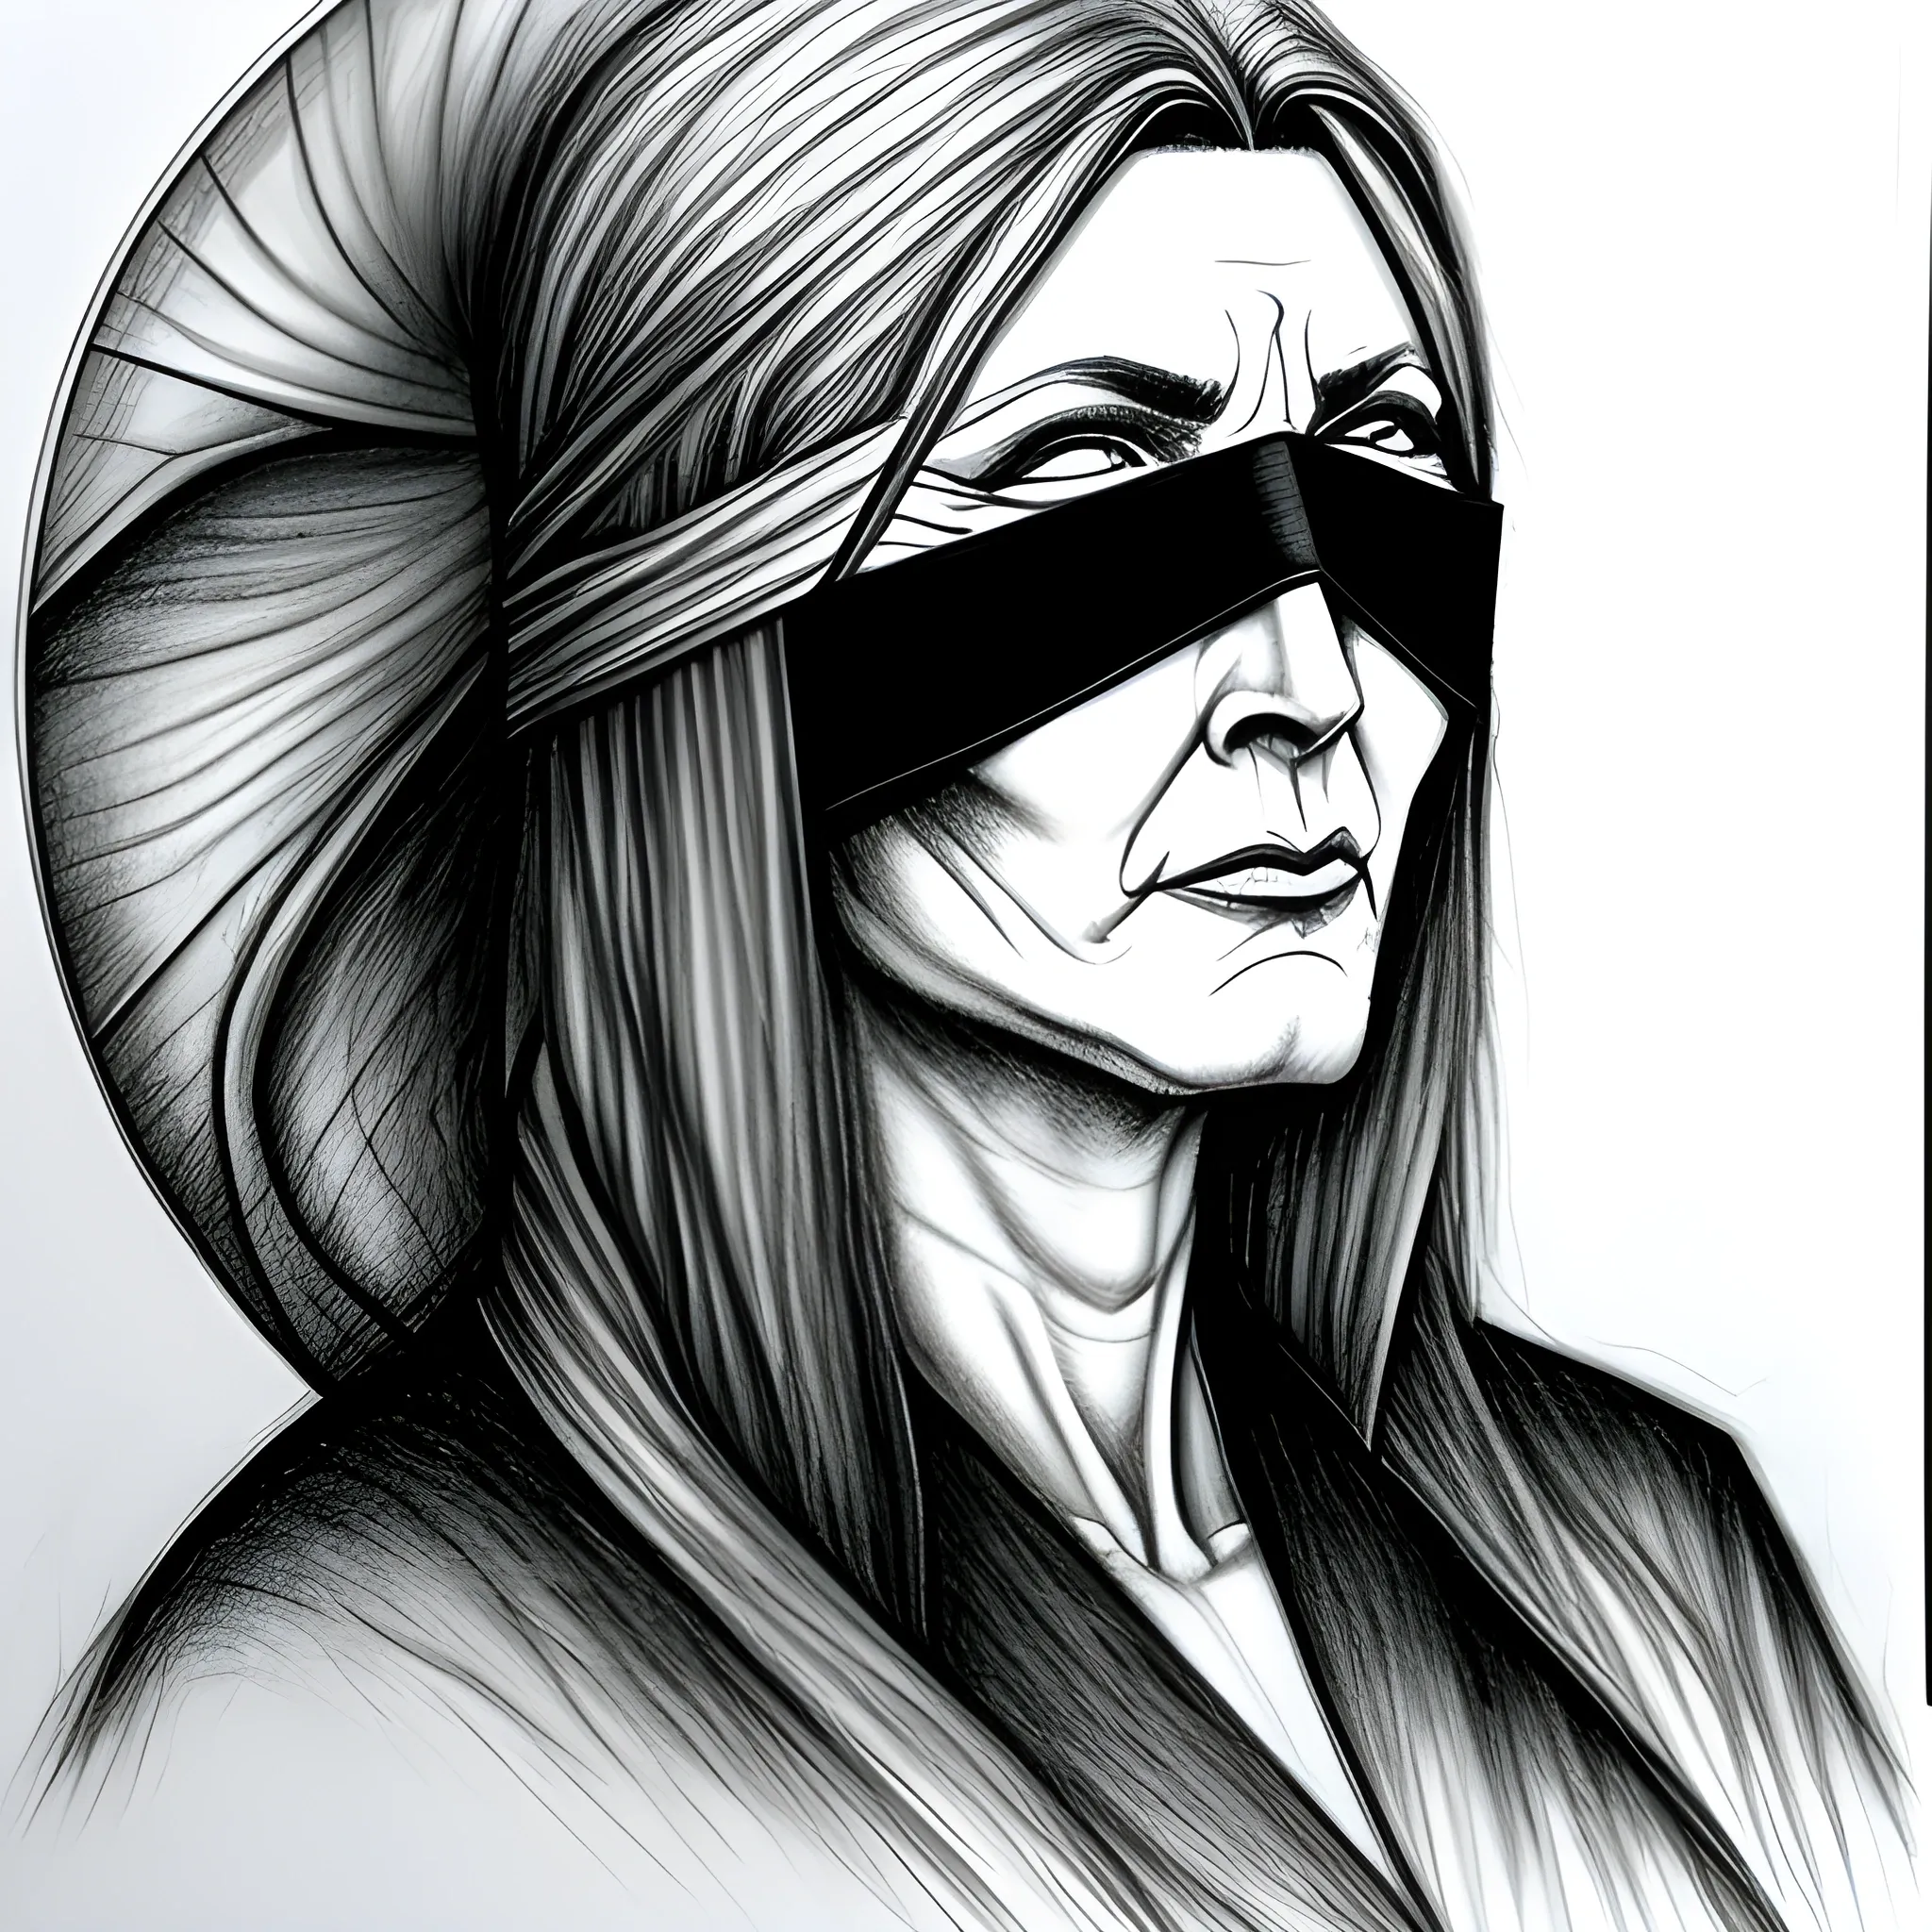 oracle, wise, no background, detailed, young, young blind woman, mask covering eyes, arcane, mystic, Pencil Sketch